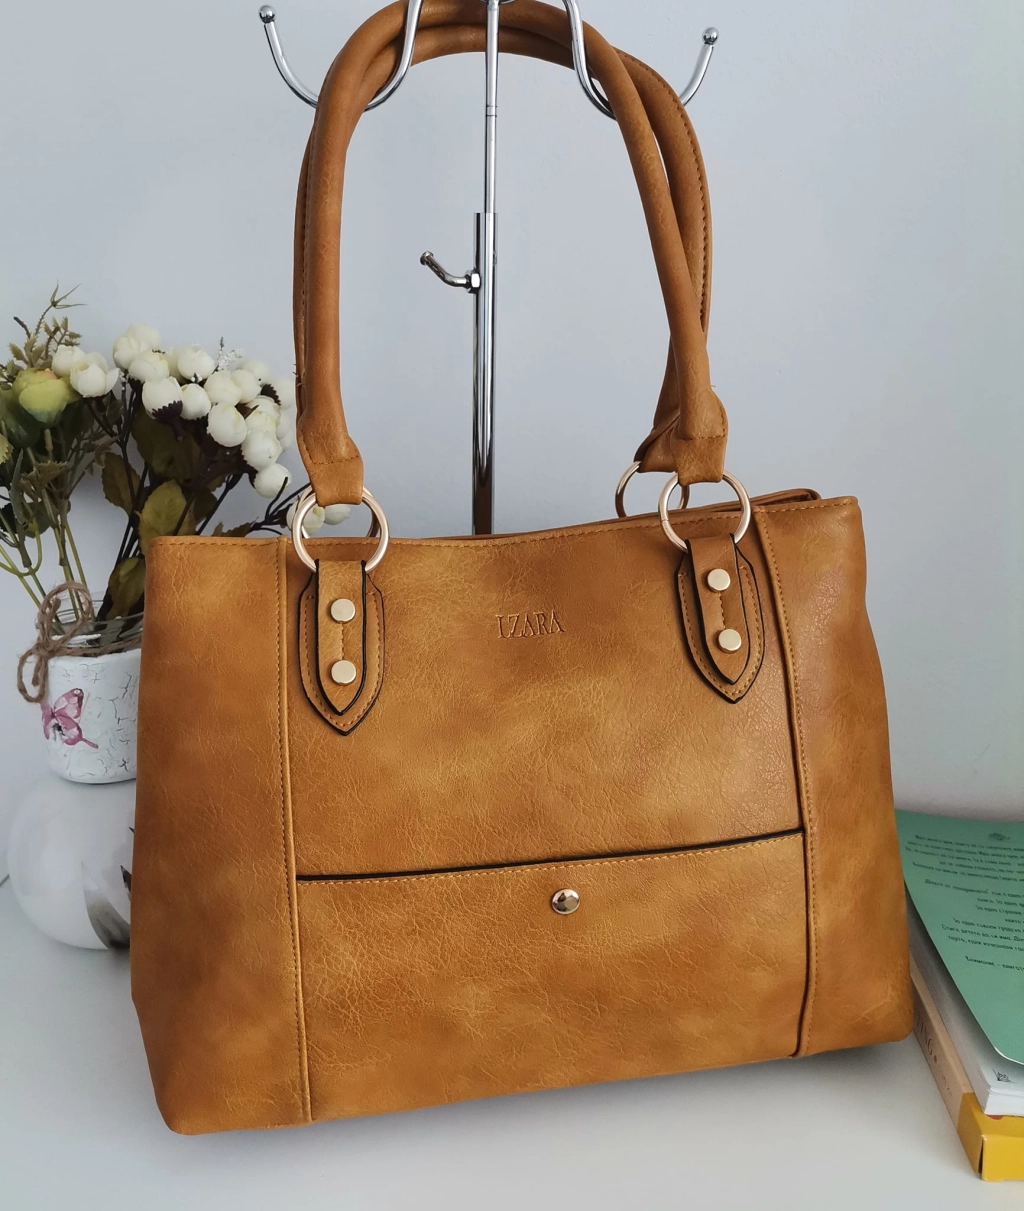 Comfortable leather bag with two compartments with separate zippers and an outer pocket